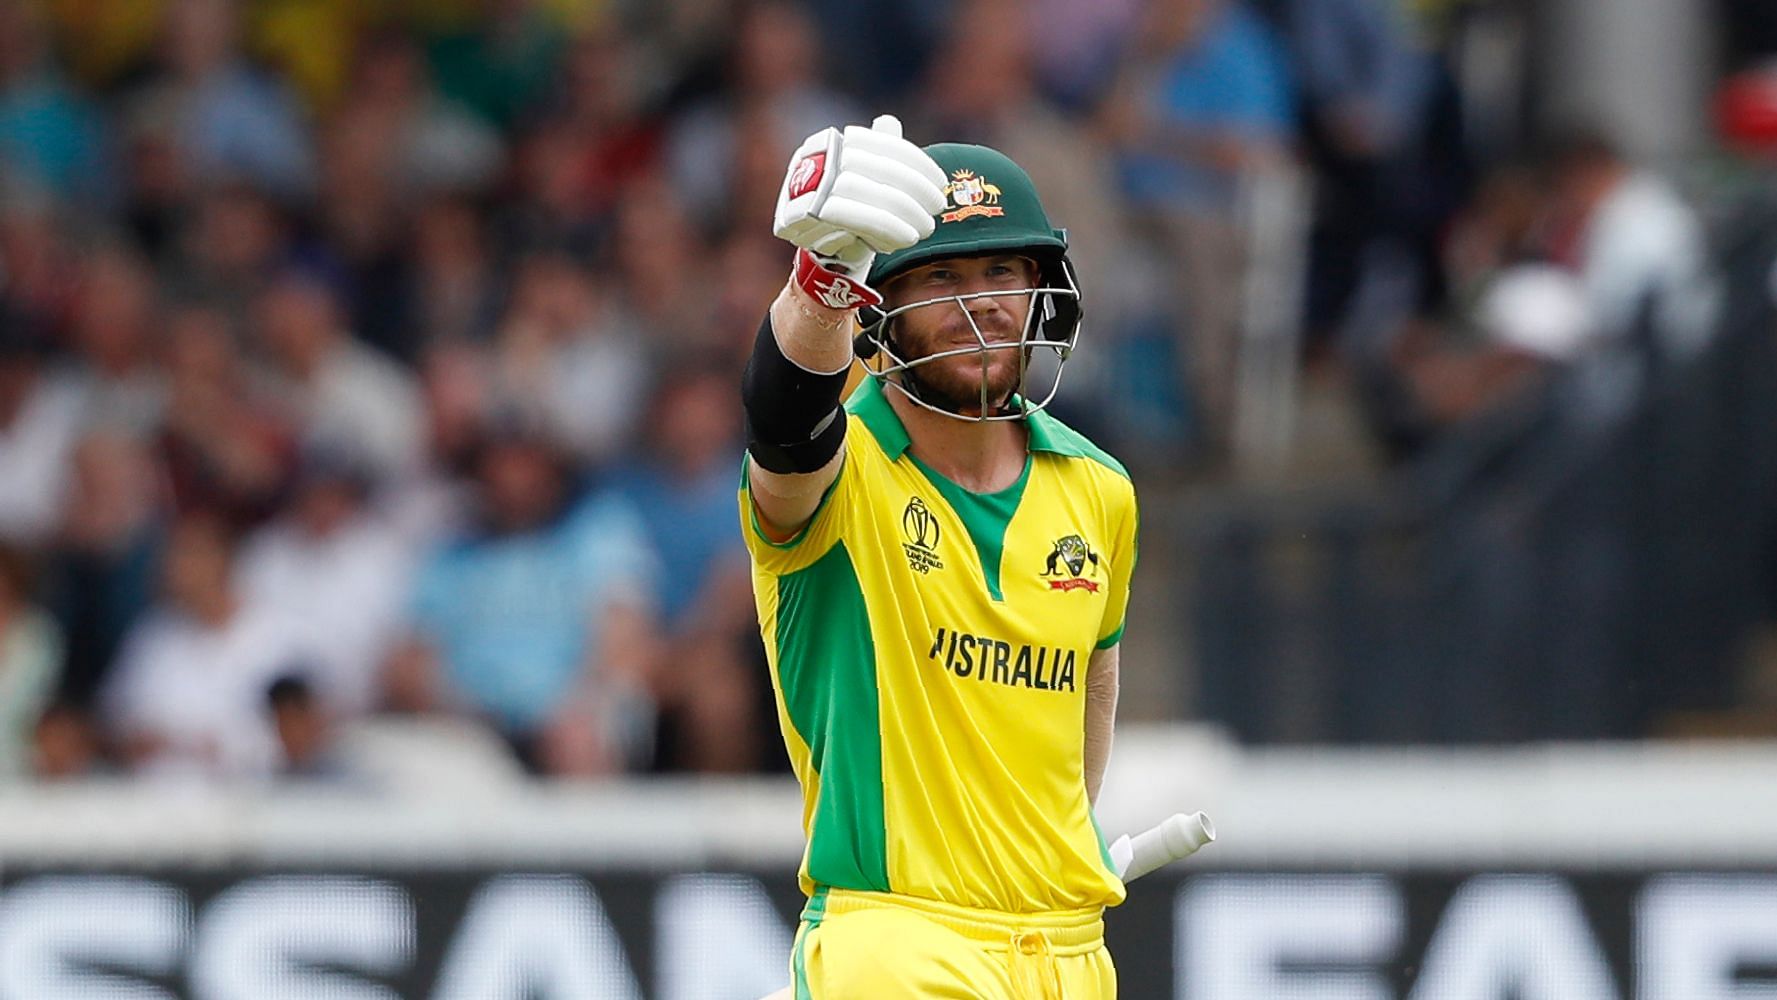 Australian opener David Warner became the first batsman to score 500 runs in the ongoing edition of the World Cup.